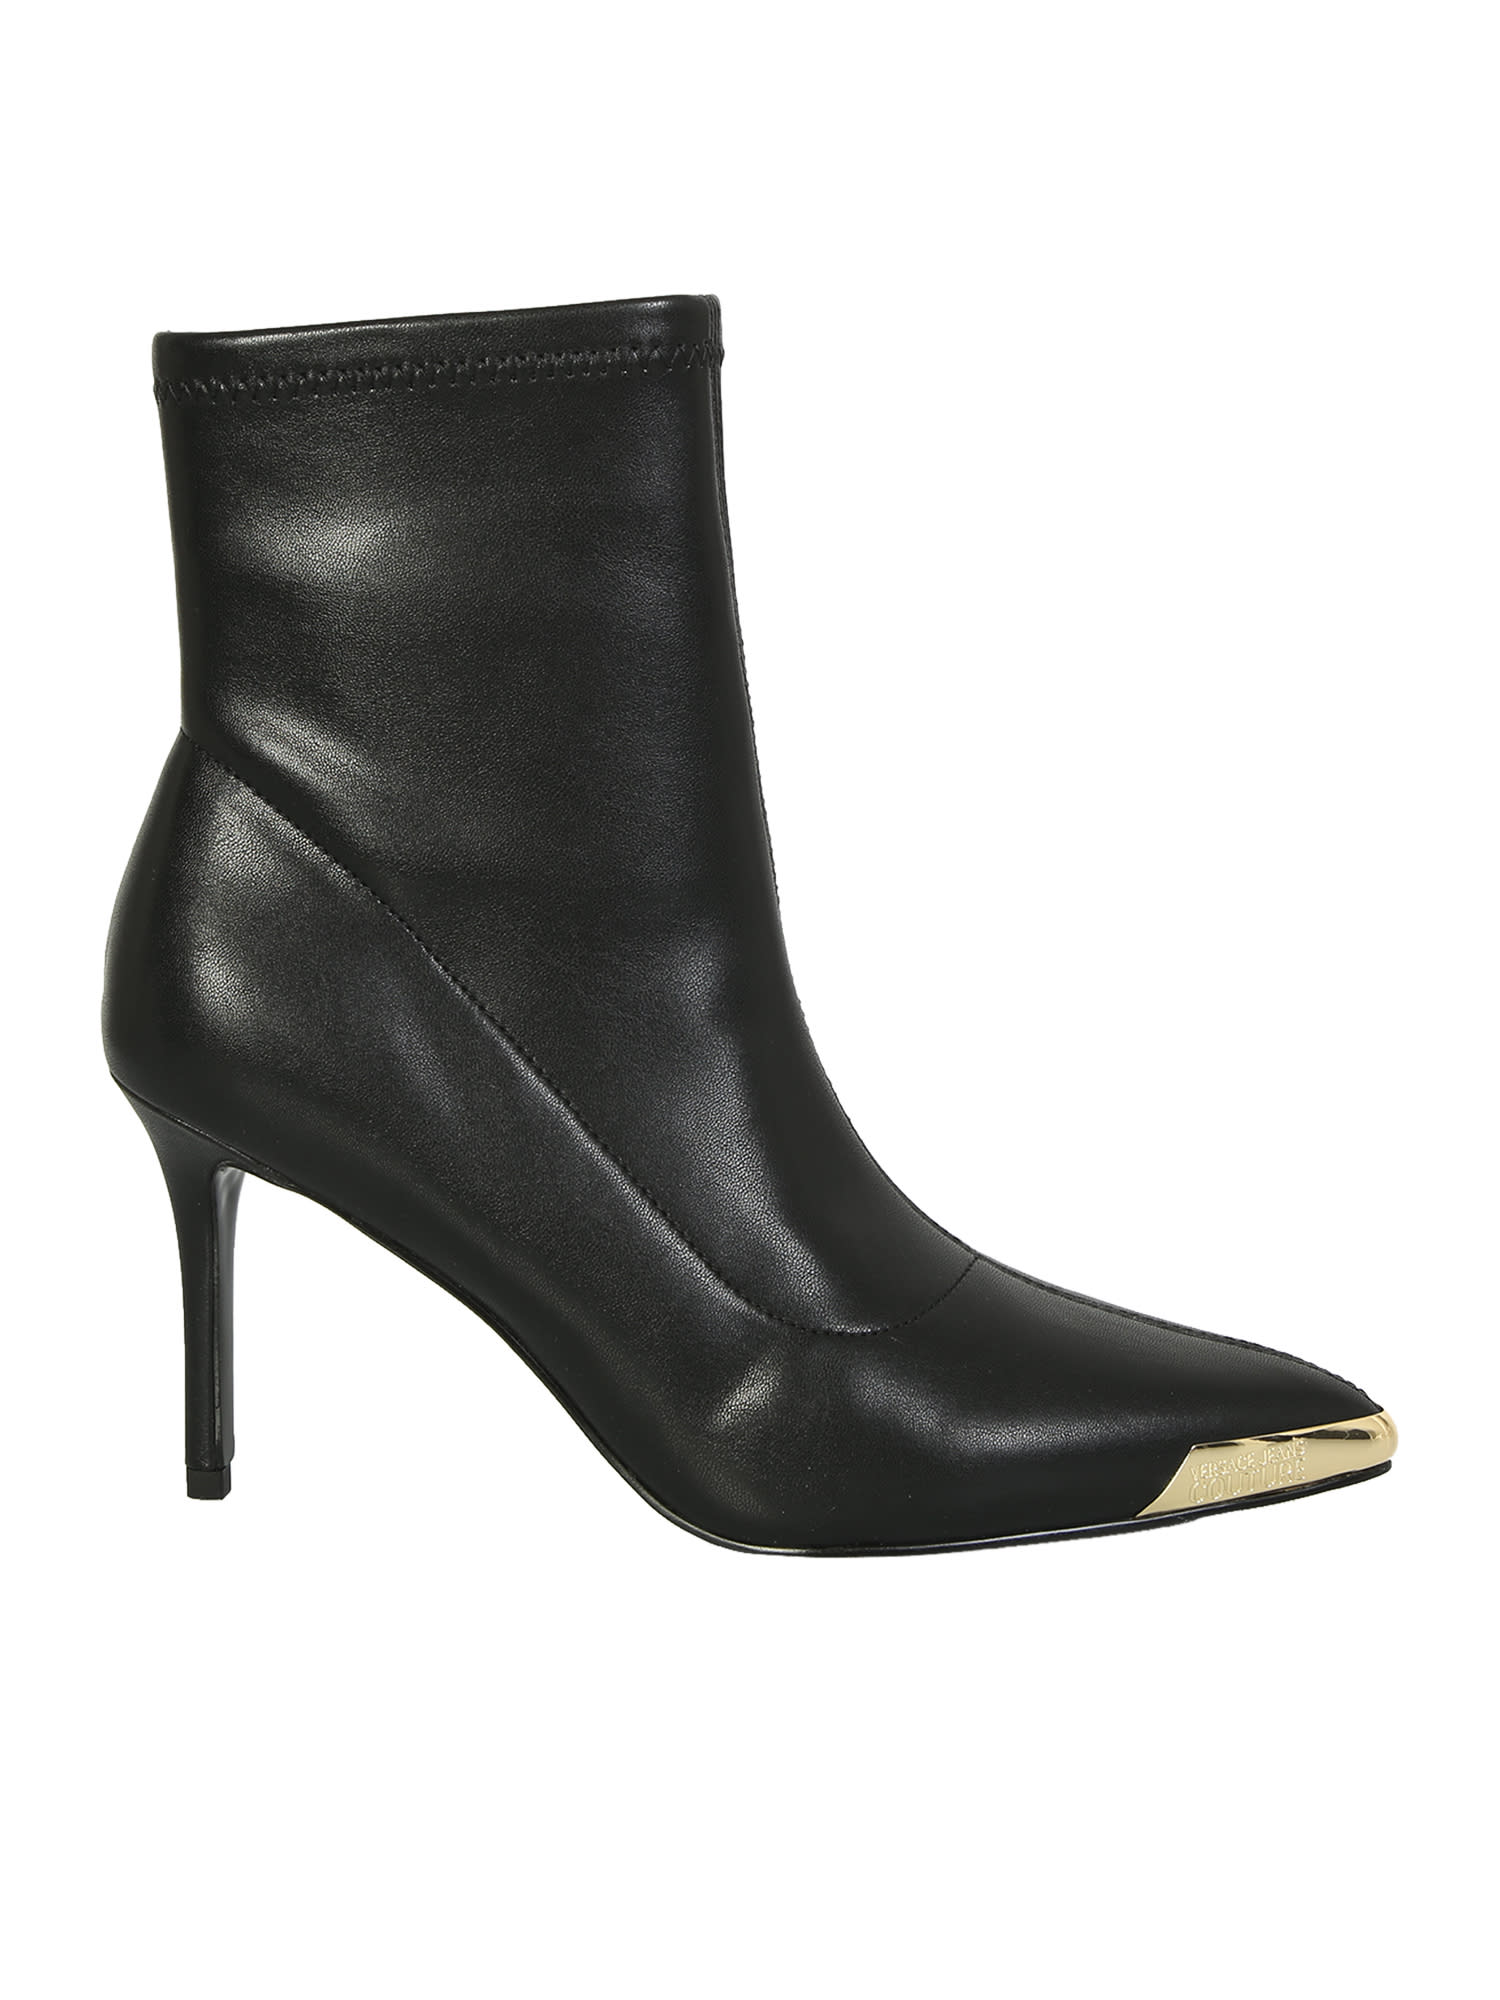 Versace Jeans Couture Boots Feature A Metal Toe And High Heel